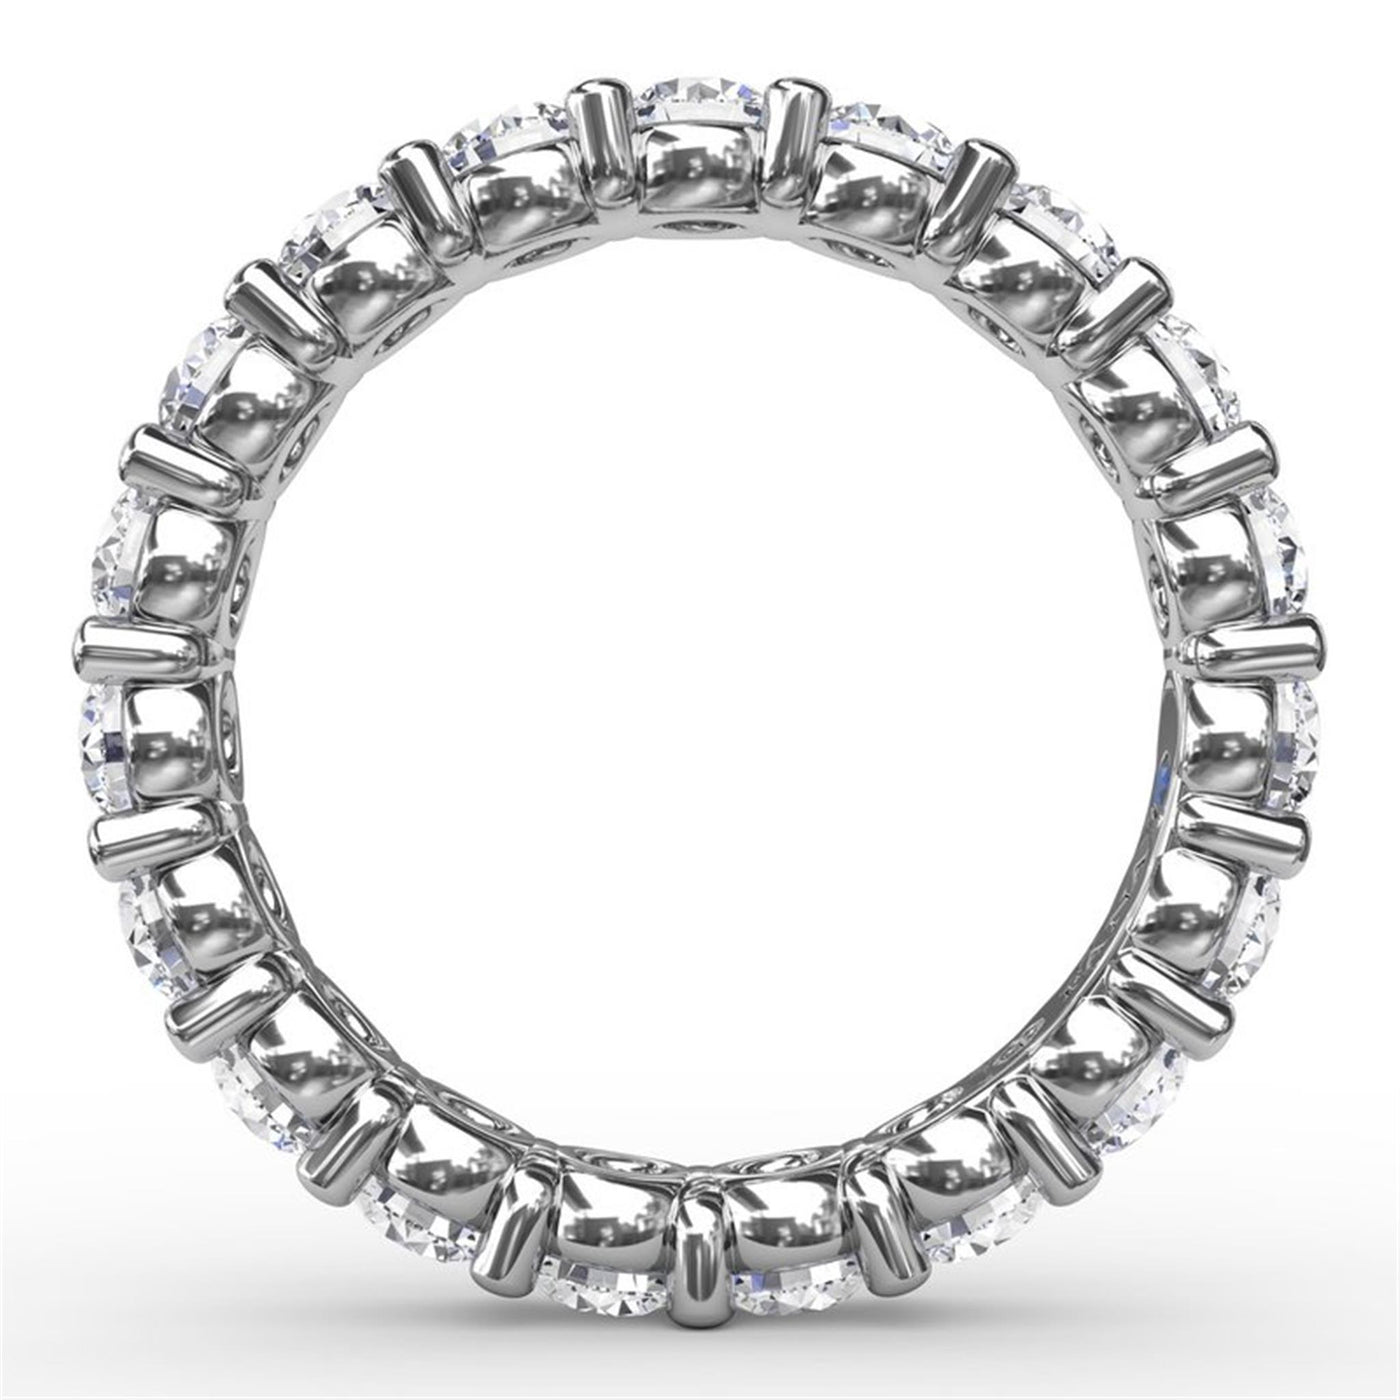 14K White Gold 2.47ctw Diamond Eternity Band 
Featuring a Polished Finish